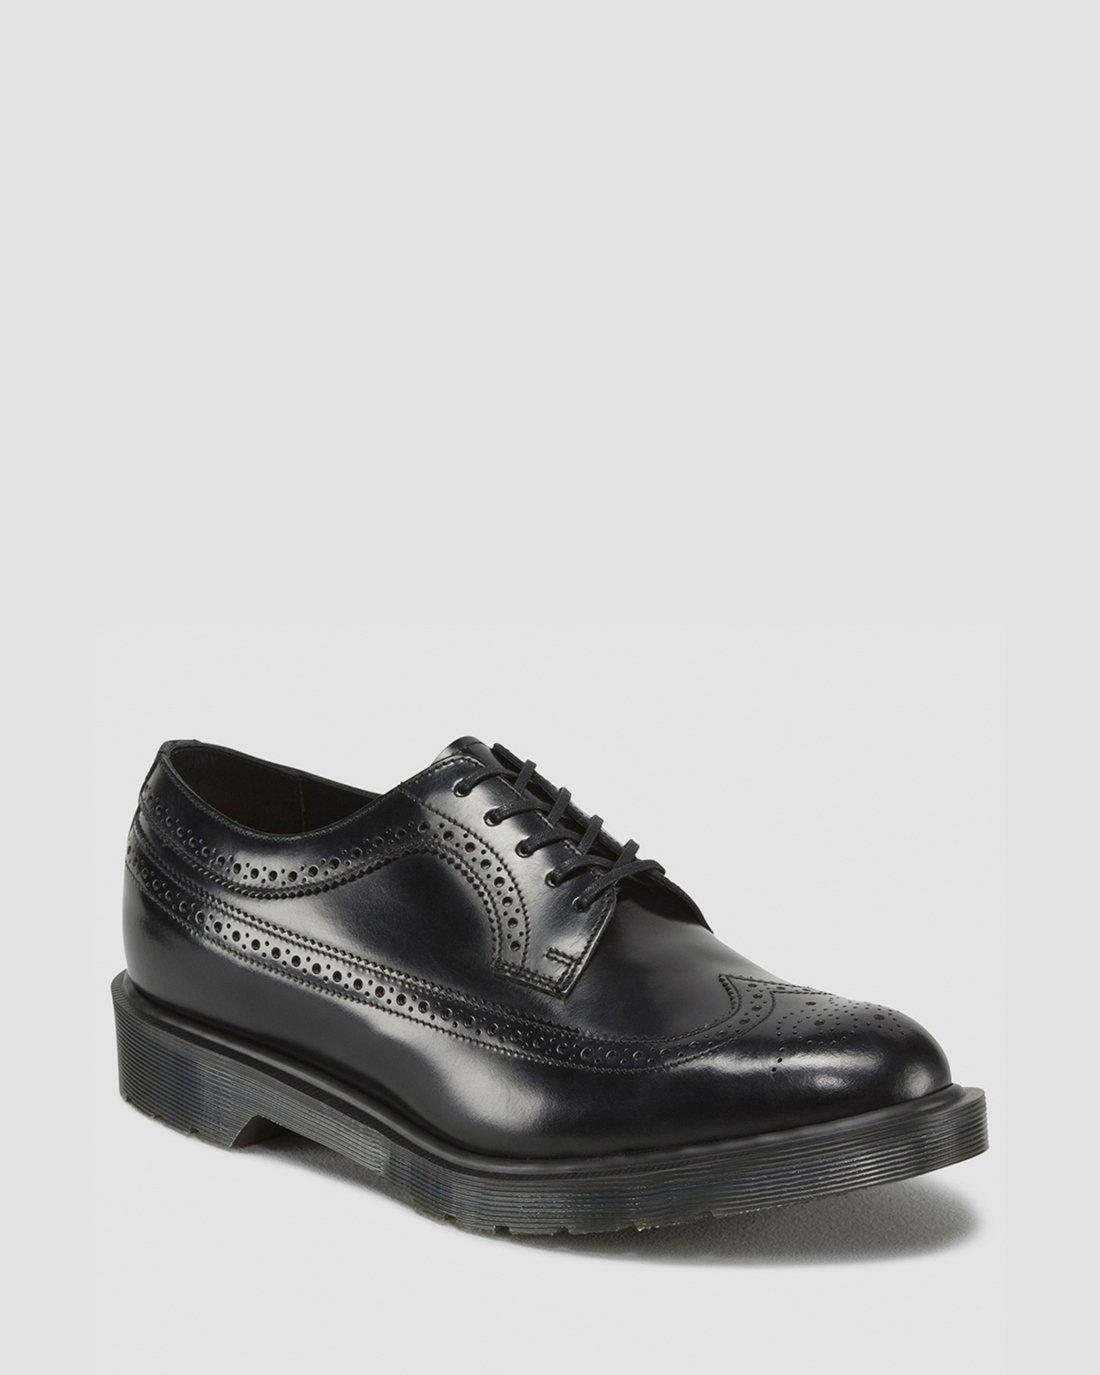 3989 BOANIL BRUSH BROGUE SHOES in Black | Dr. Martens